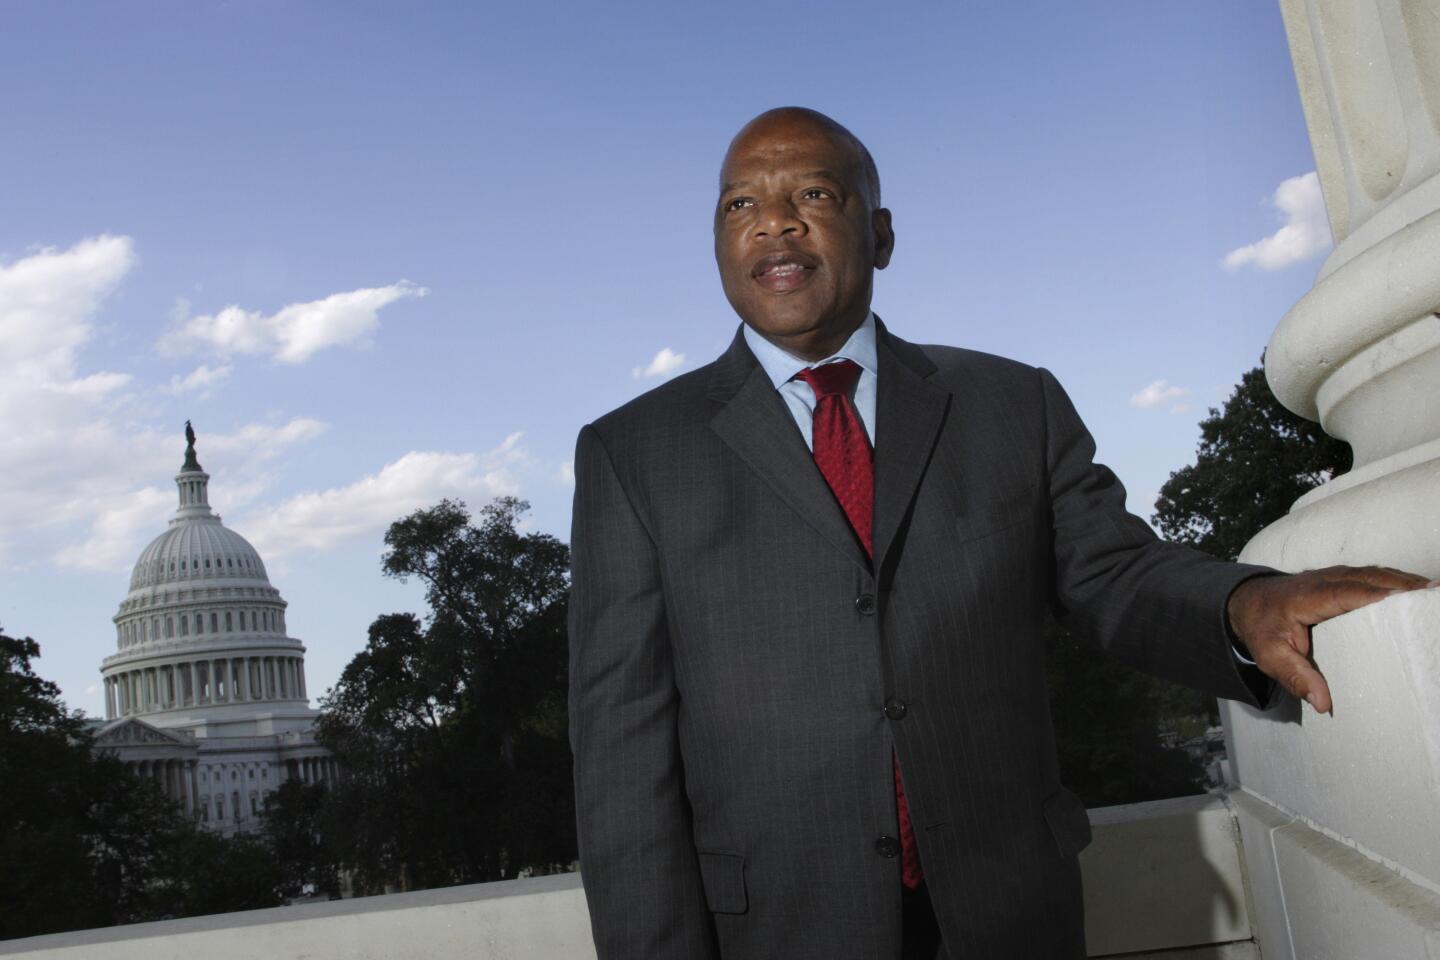 John Lewis is pictured standing in a suit with the Capitol Dome in the background